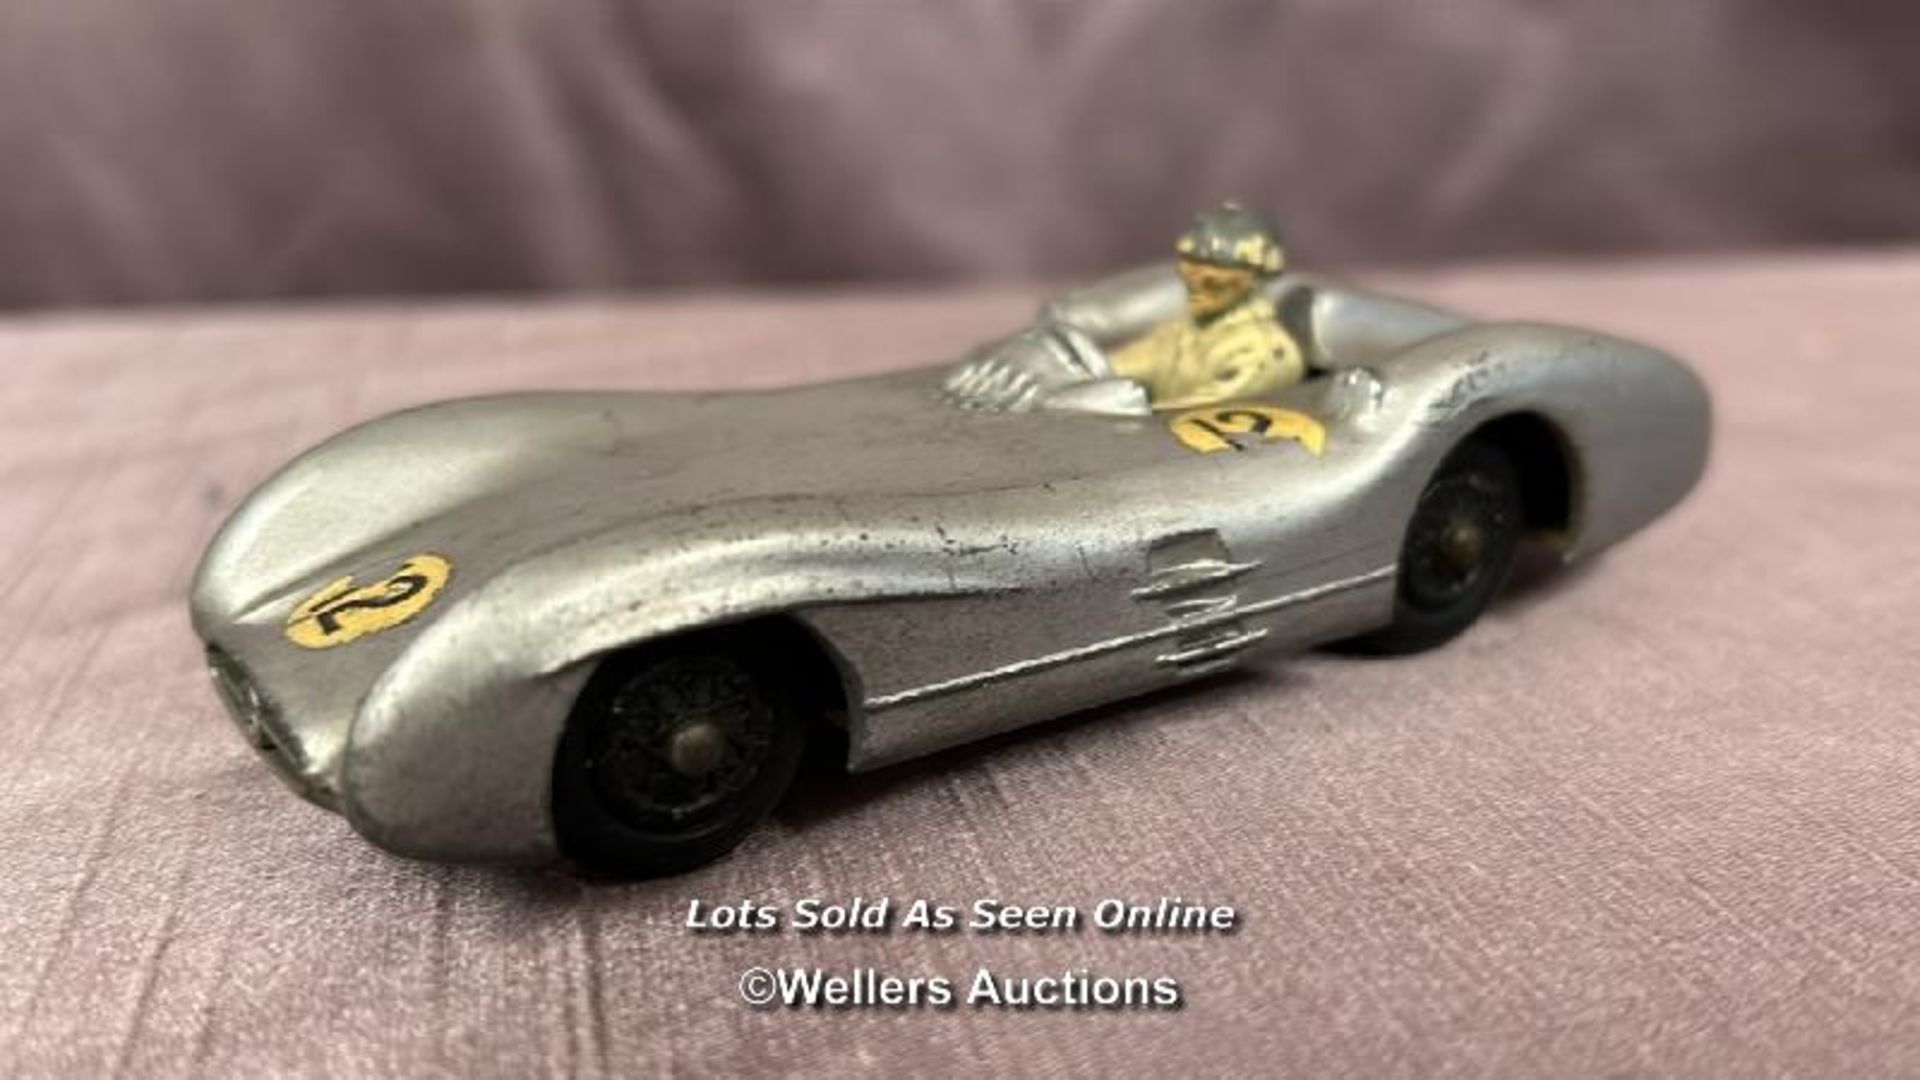 THE CRESCENT TOY COMPANY DIE CAST MERCEDES BENZ 2.5LT GRAND PRIX RACING CAR - Image 2 of 5